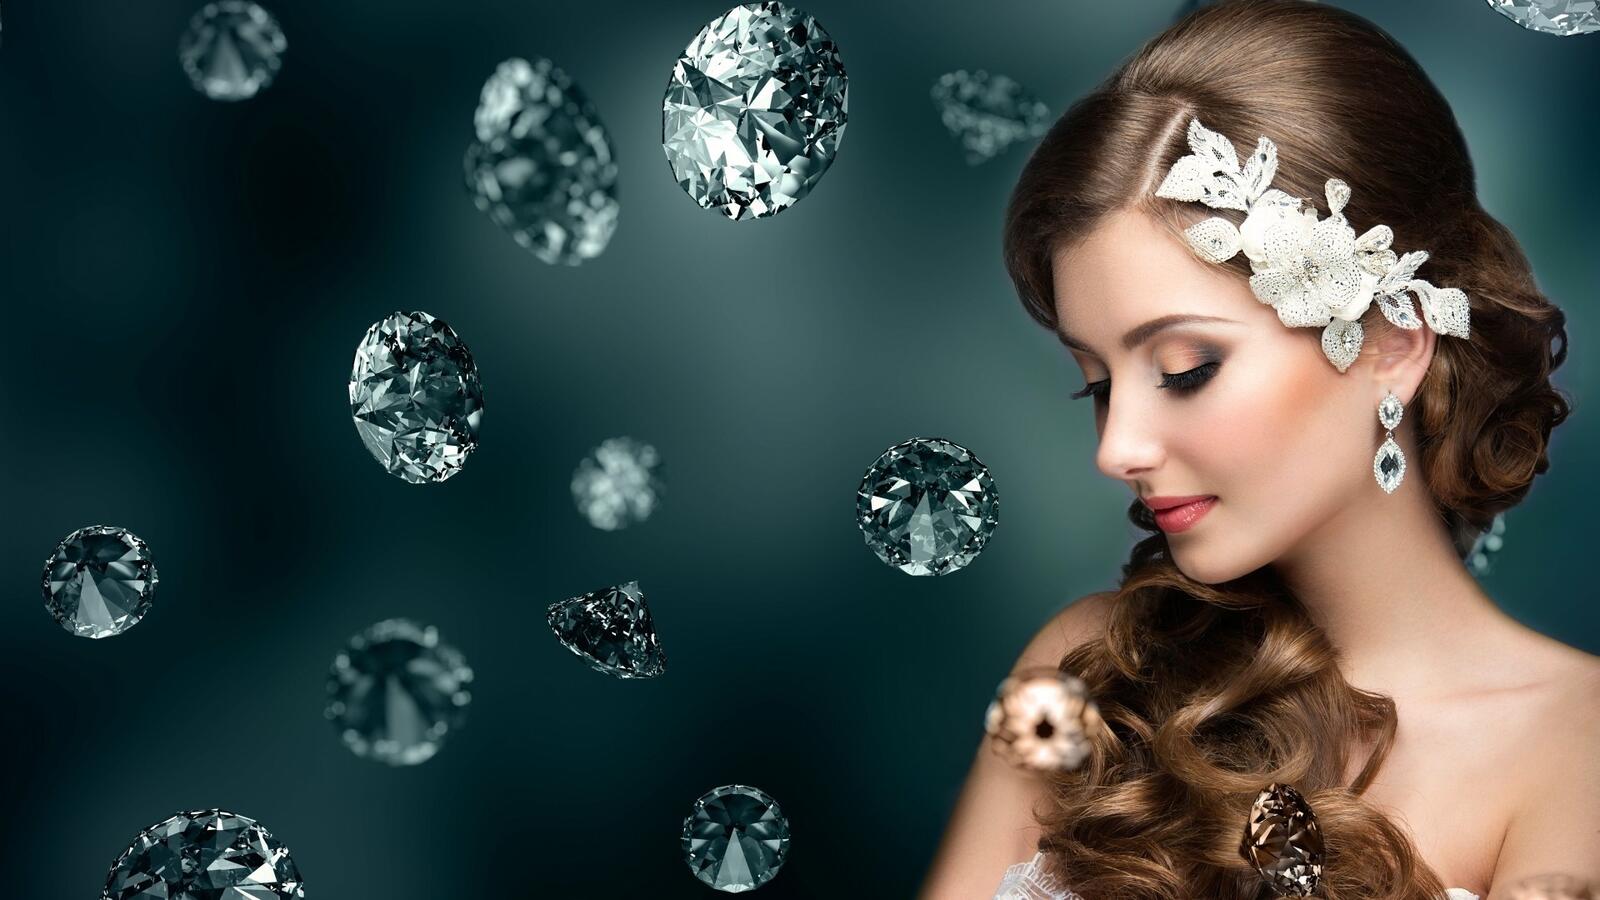 Wallpapers girl make-up hair ornaments on the desktop